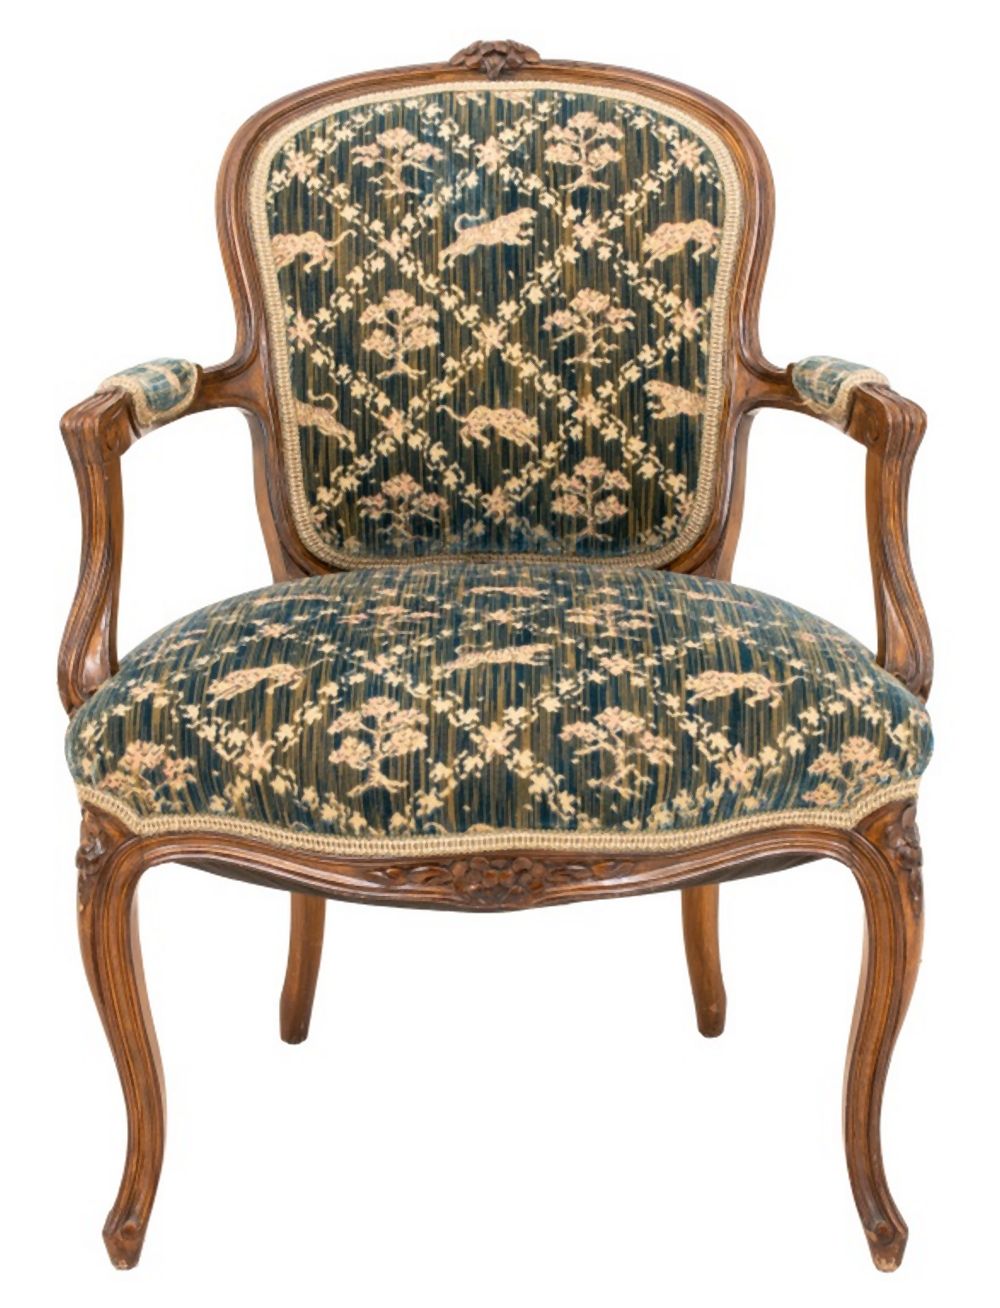 LOUIS XV STYLE ARM CHAIR OR FAUTEUIL